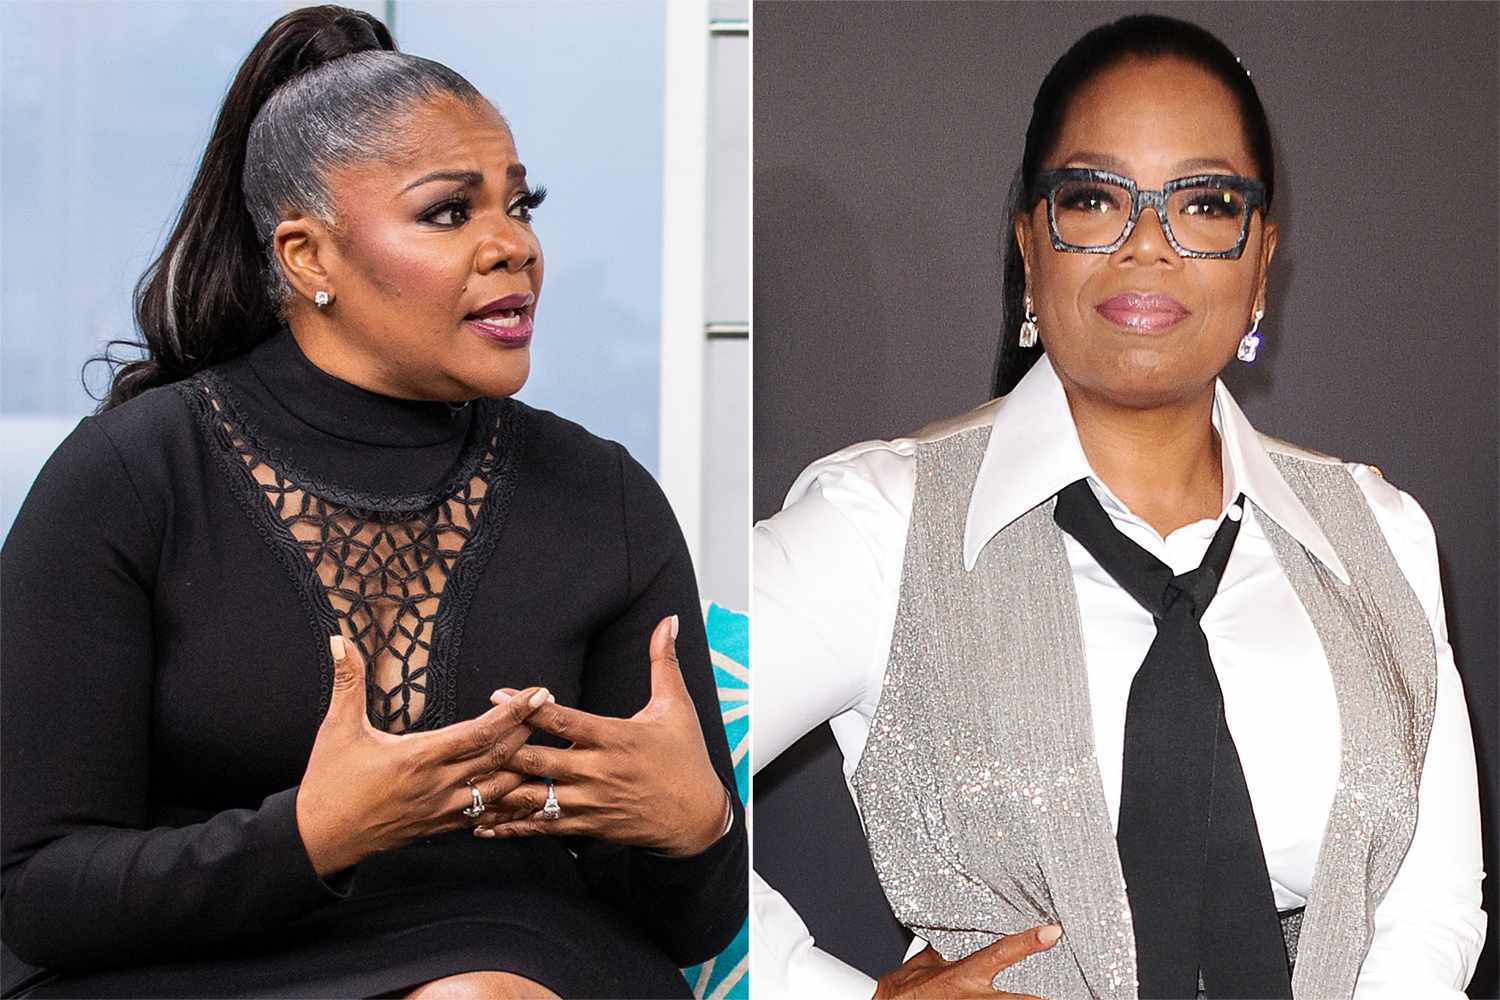 Here We Go Again: Mo’Nique Rehashes Feud With ‘Raggedy B—-‘ Oprah Winfrey, Roasts ‘Simple-Minded’ TV Mogul During Comedy Set